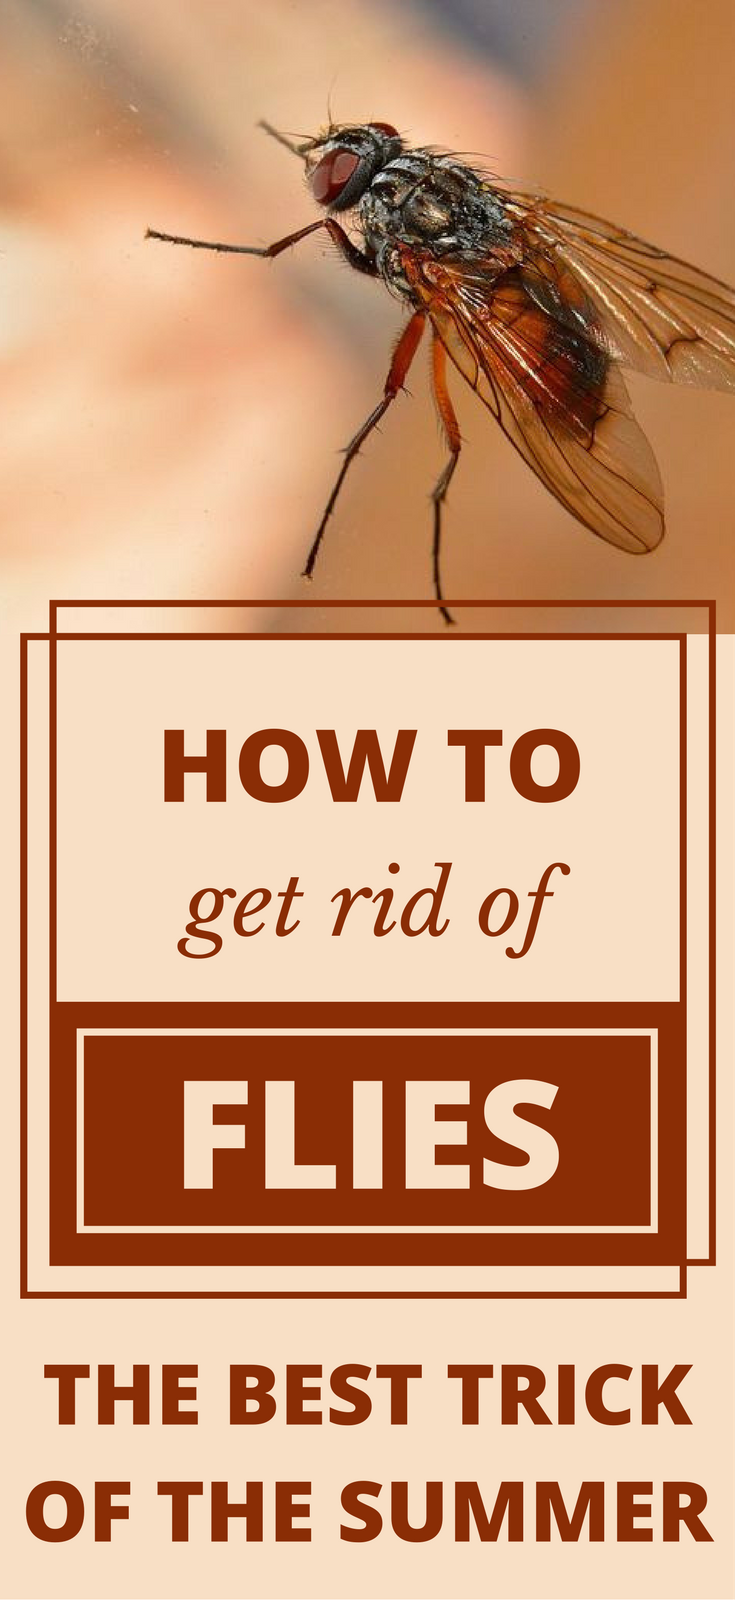 How To Get Rid Of Flies – The Best Trick Of The Summer - TryCleaningTips.com -   18 how to get rid of flies outside ideas